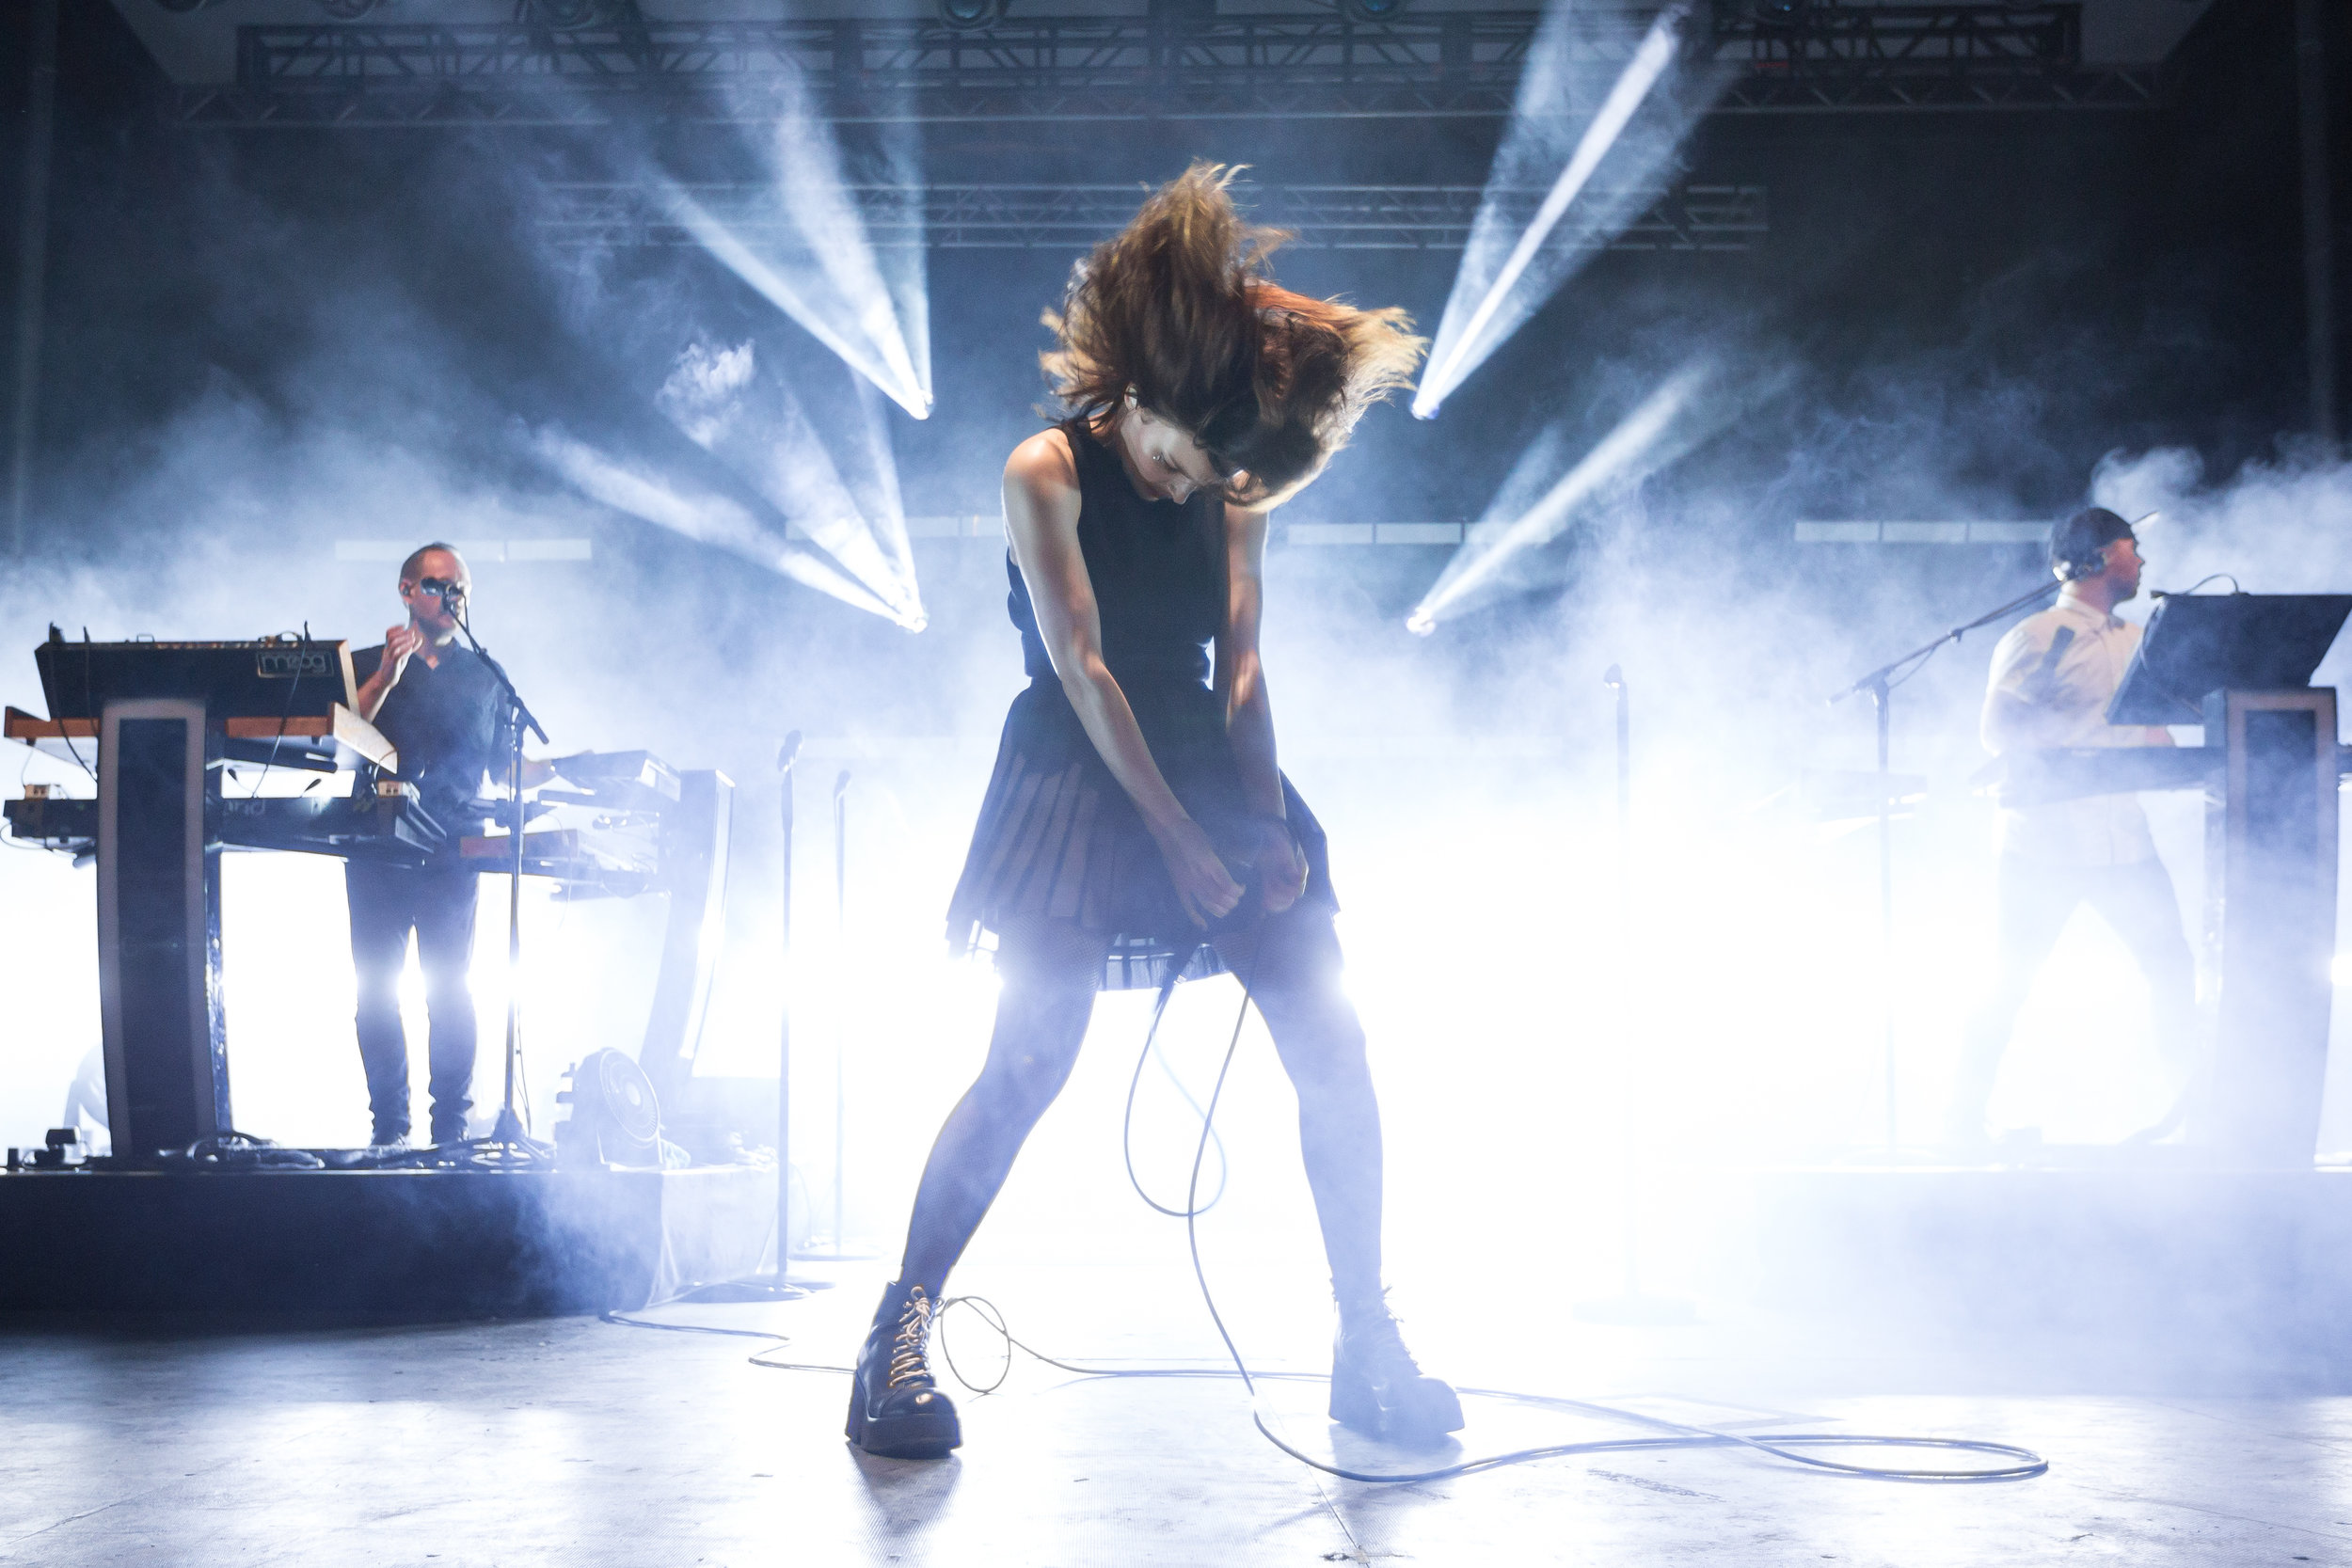  Lauren Mayberry, lead vocals for Chvrches, a Scottish synthpop band, dances on stage on day one of Thrival Music Festival in Rankin on Friday September 23, 2016.  